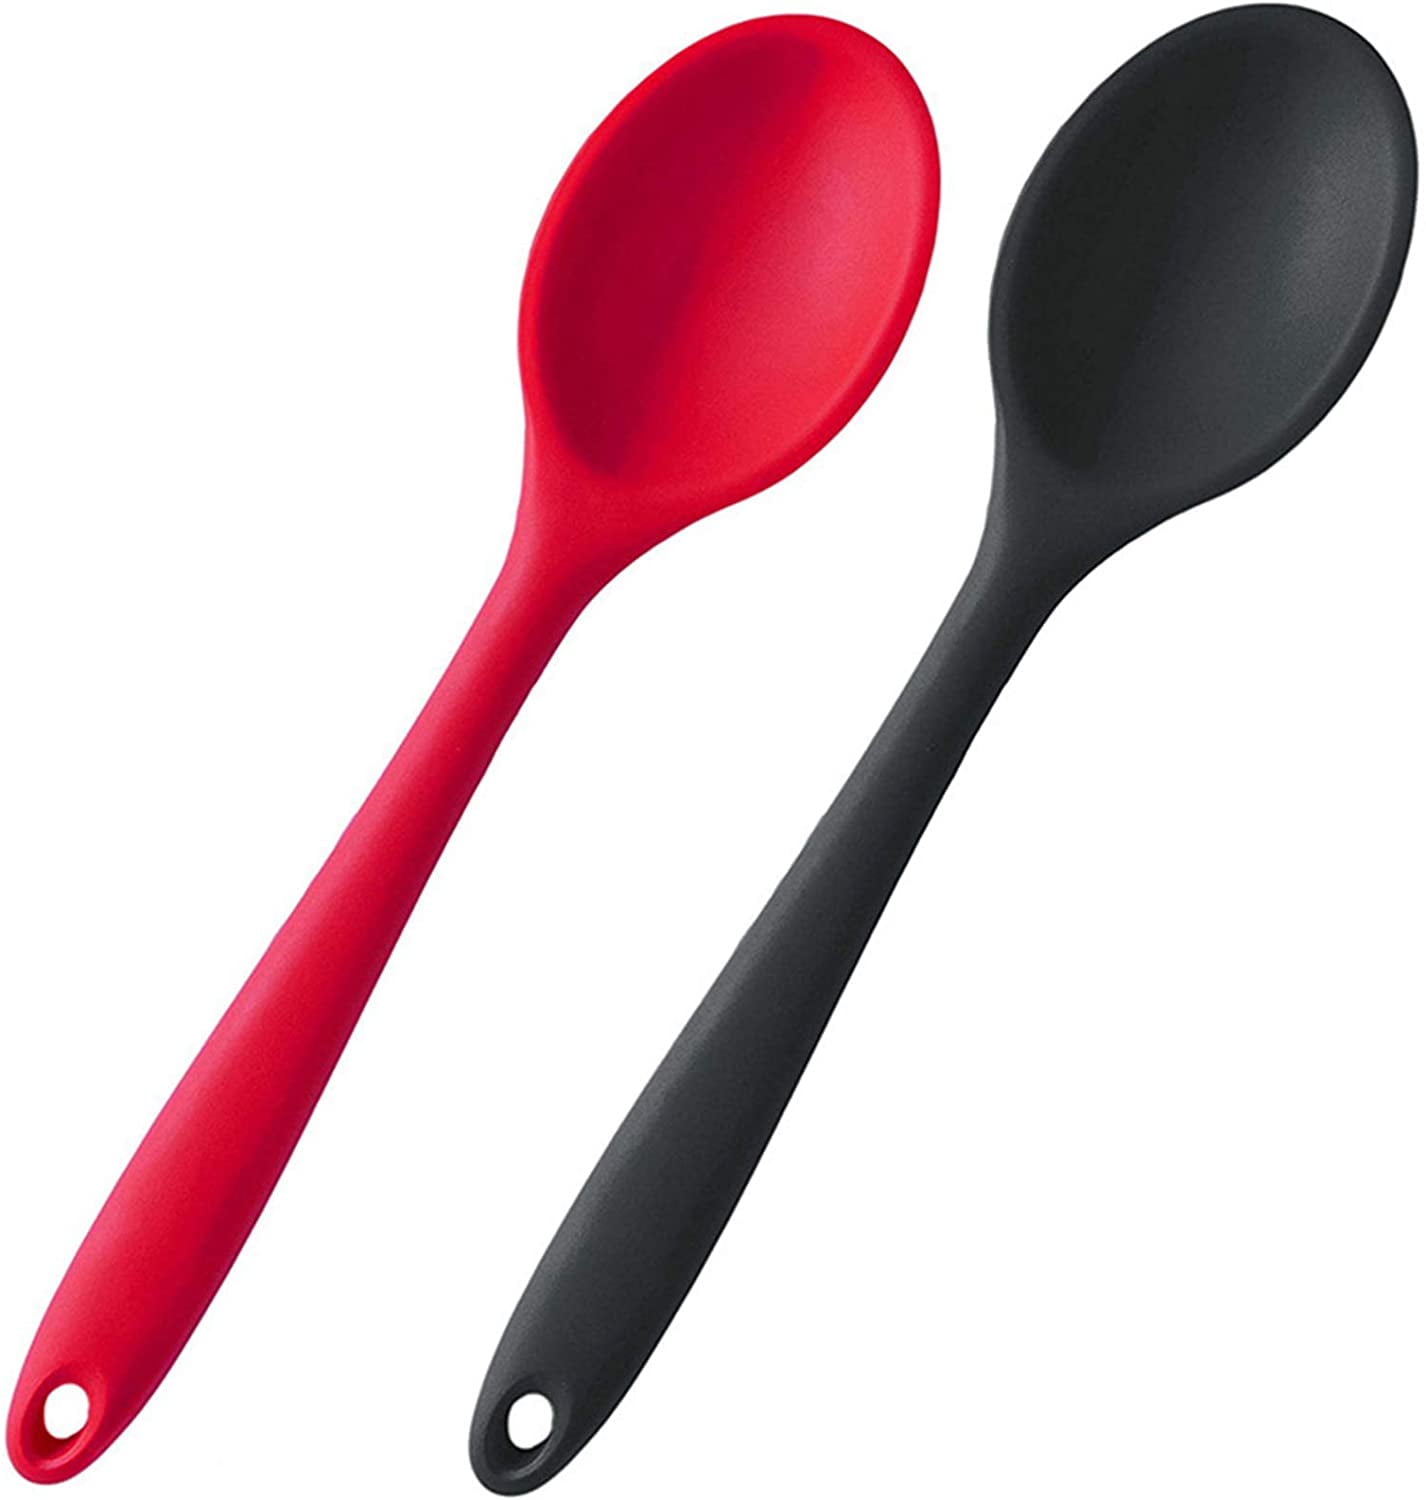 Black and Red Hygienic Design Cooking Utensi Mixing Spoons for Kitchen Cooking Baking Stirring Mixing Tools 2 Pcs Silicone Spoons for Cooking Heat Resistant 